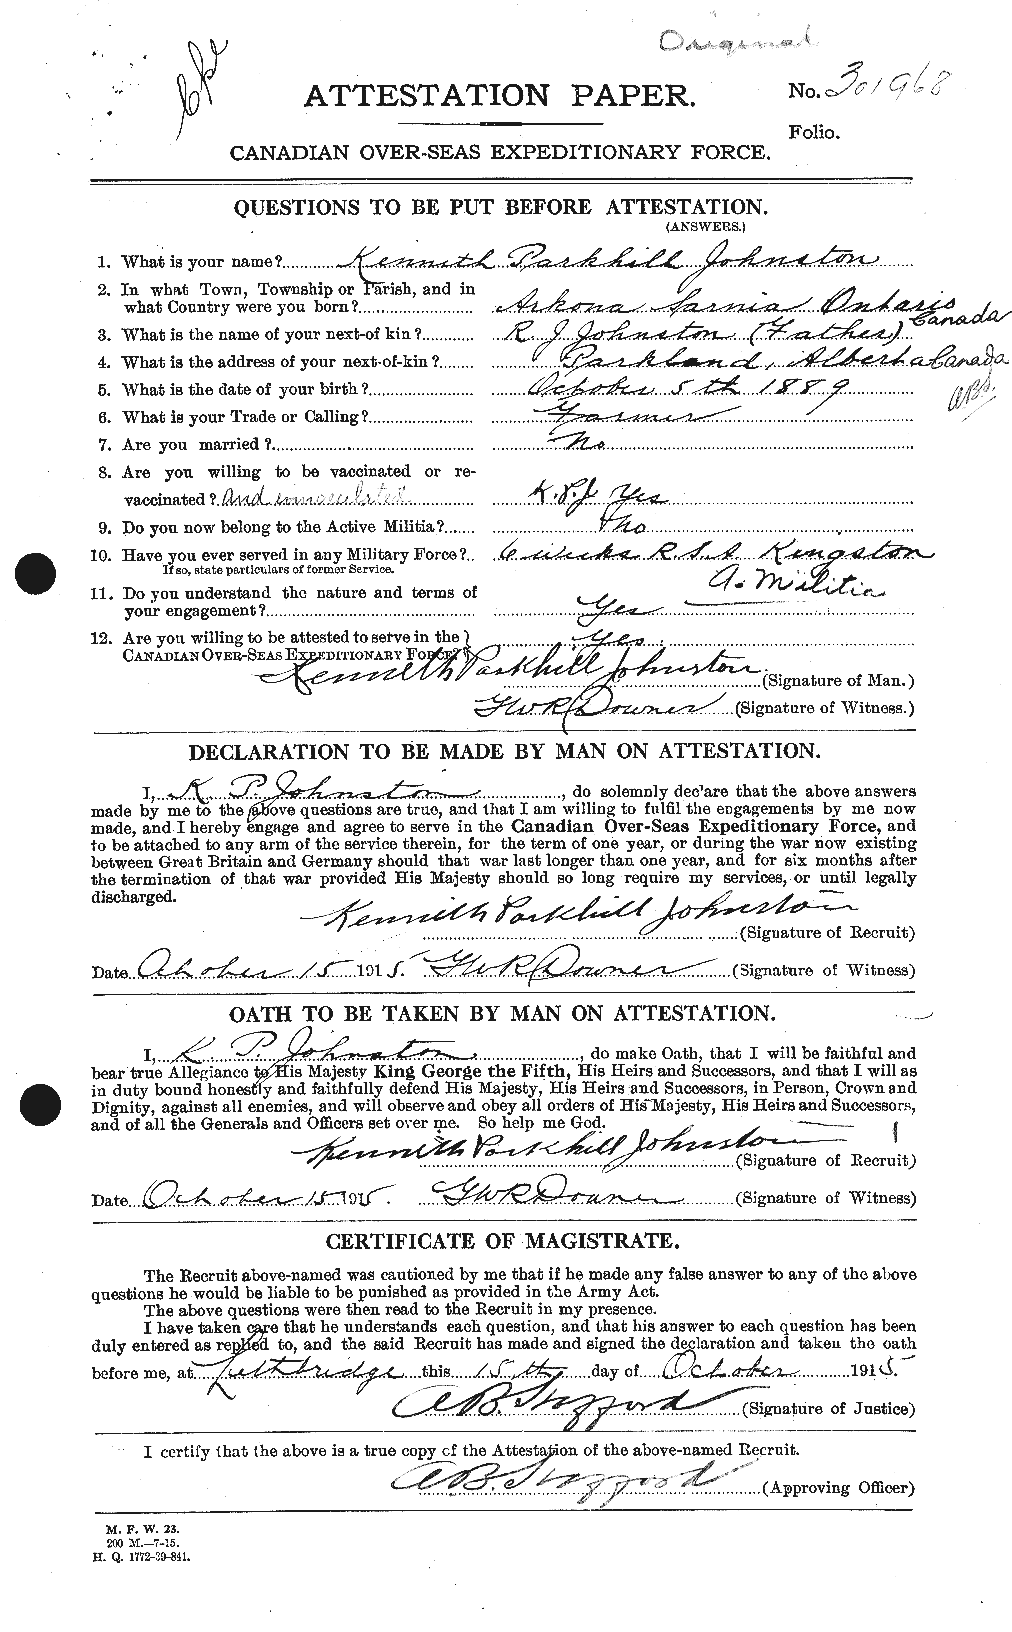 Personnel Records of the First World War - CEF 422929a